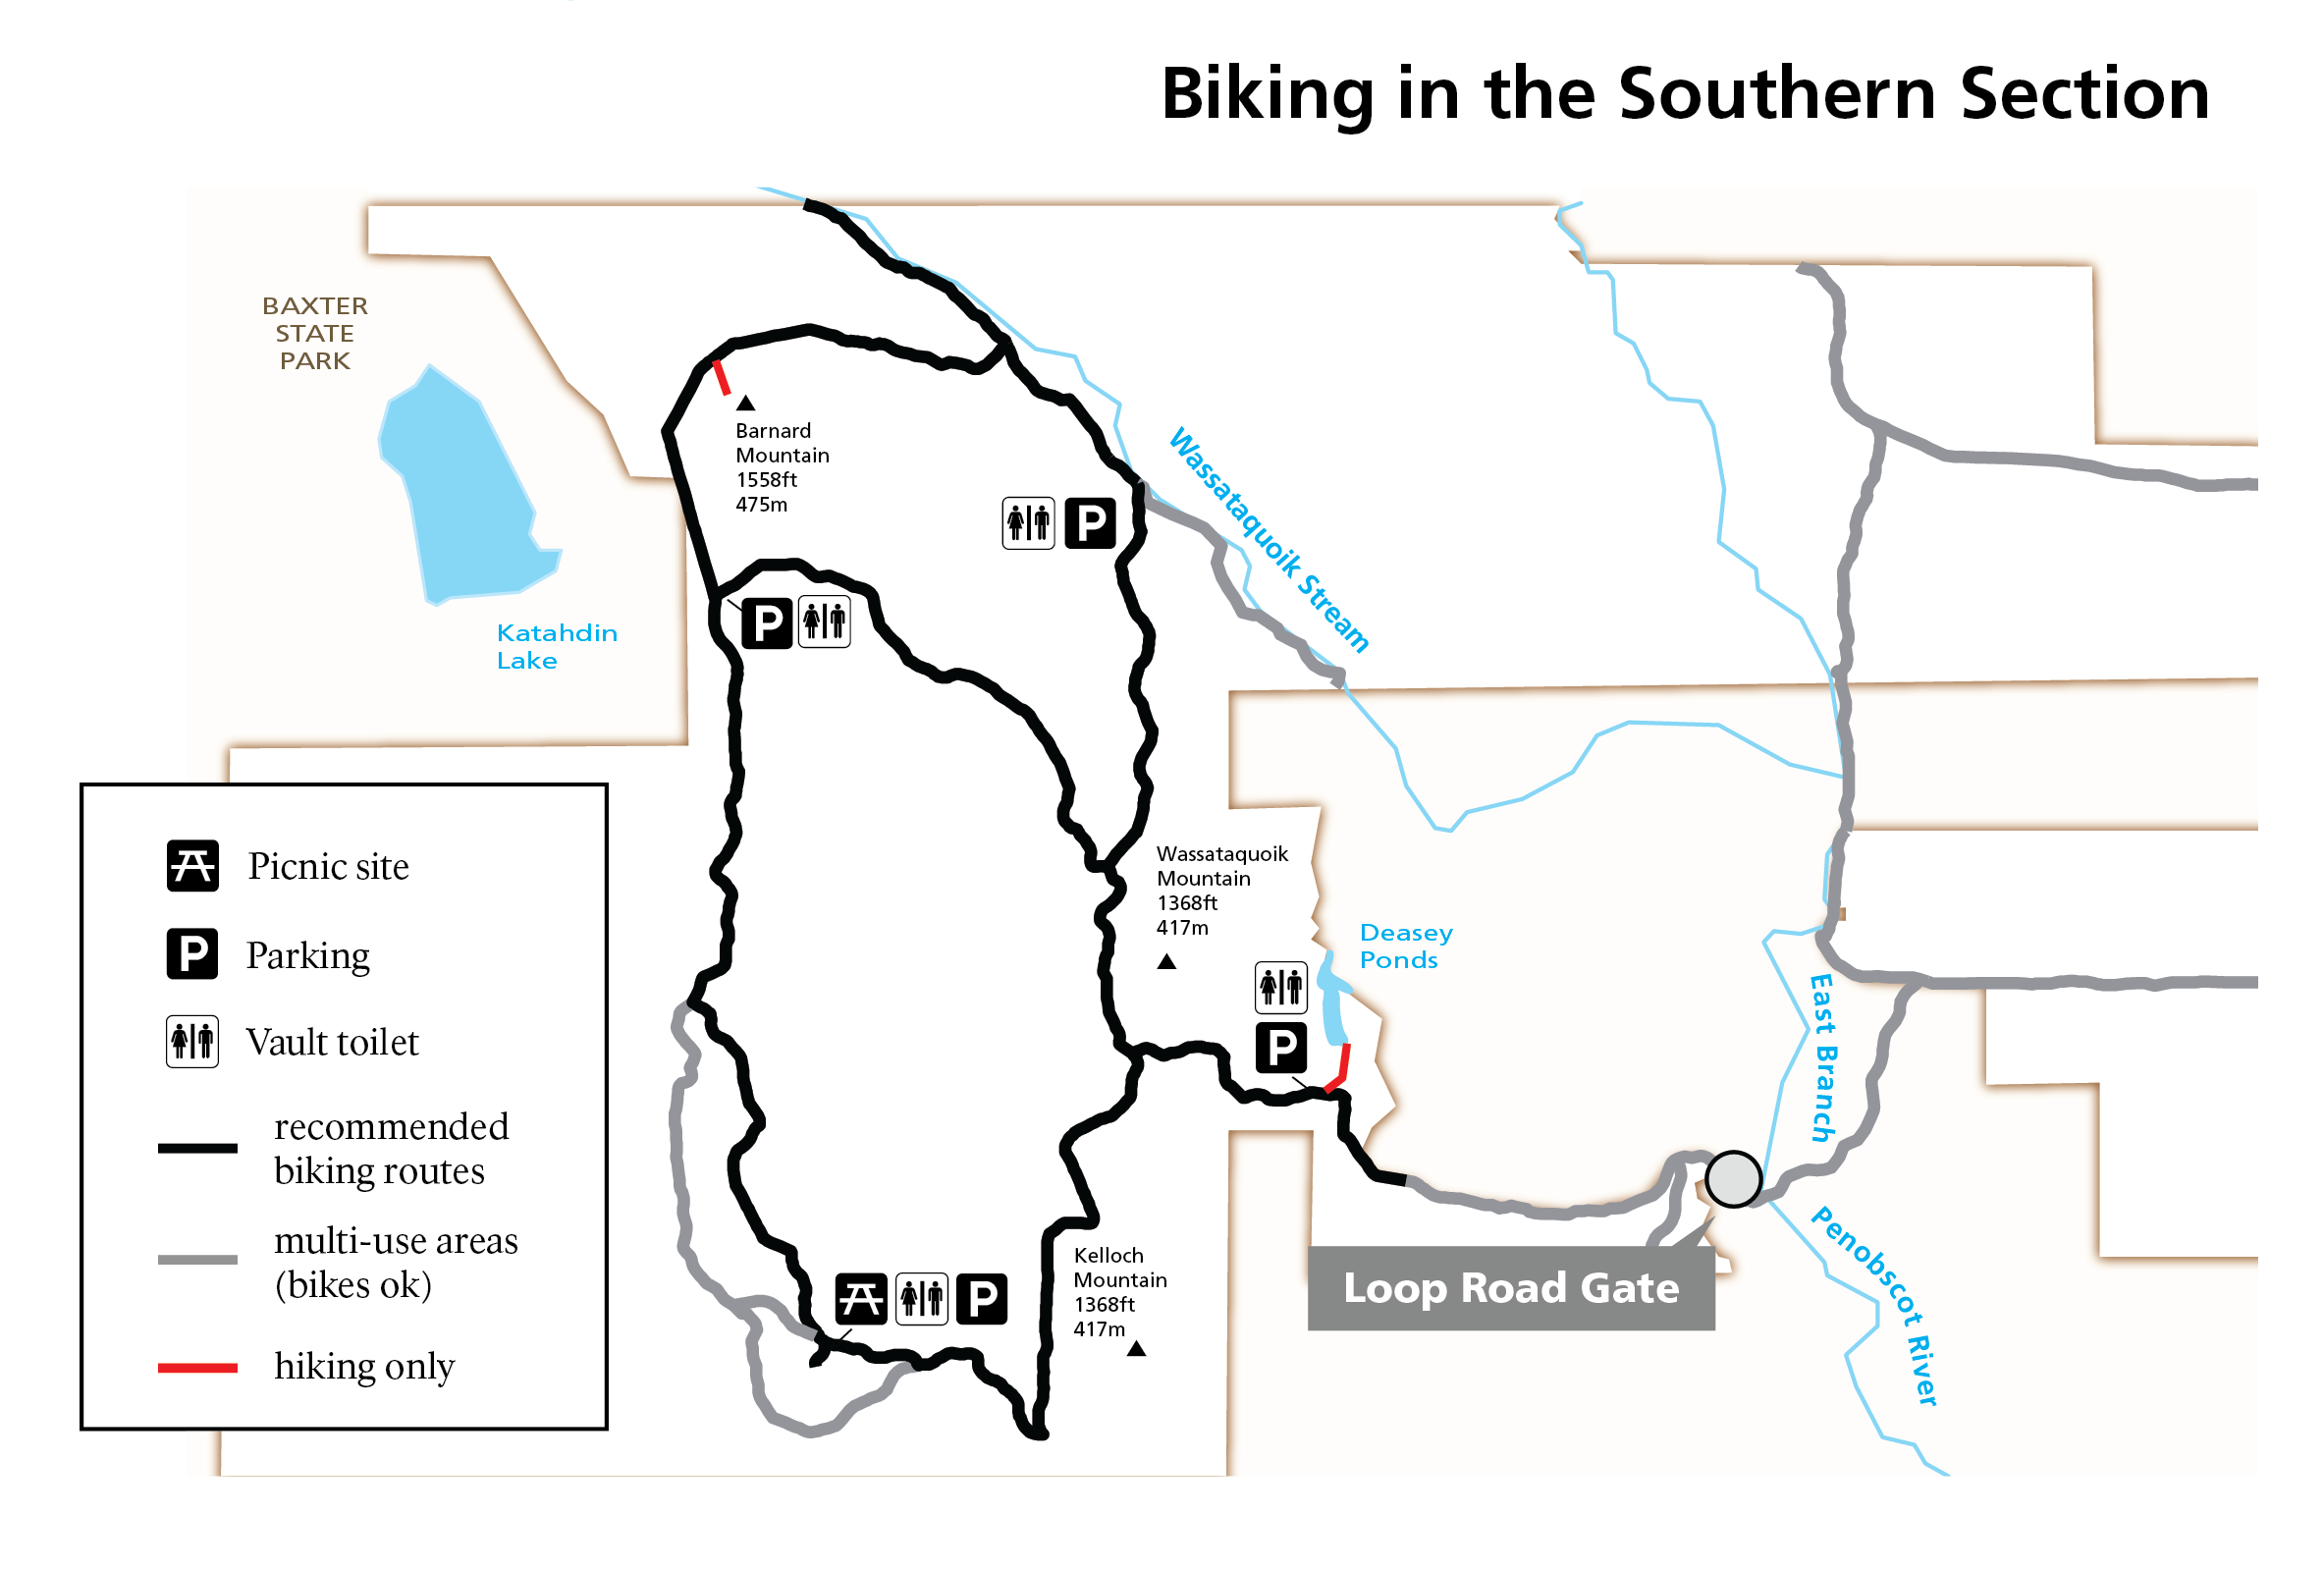 A map for biking in the southern area of the monument. The map highlights recommended routes, multi-use routes, and areas that are hiking only.